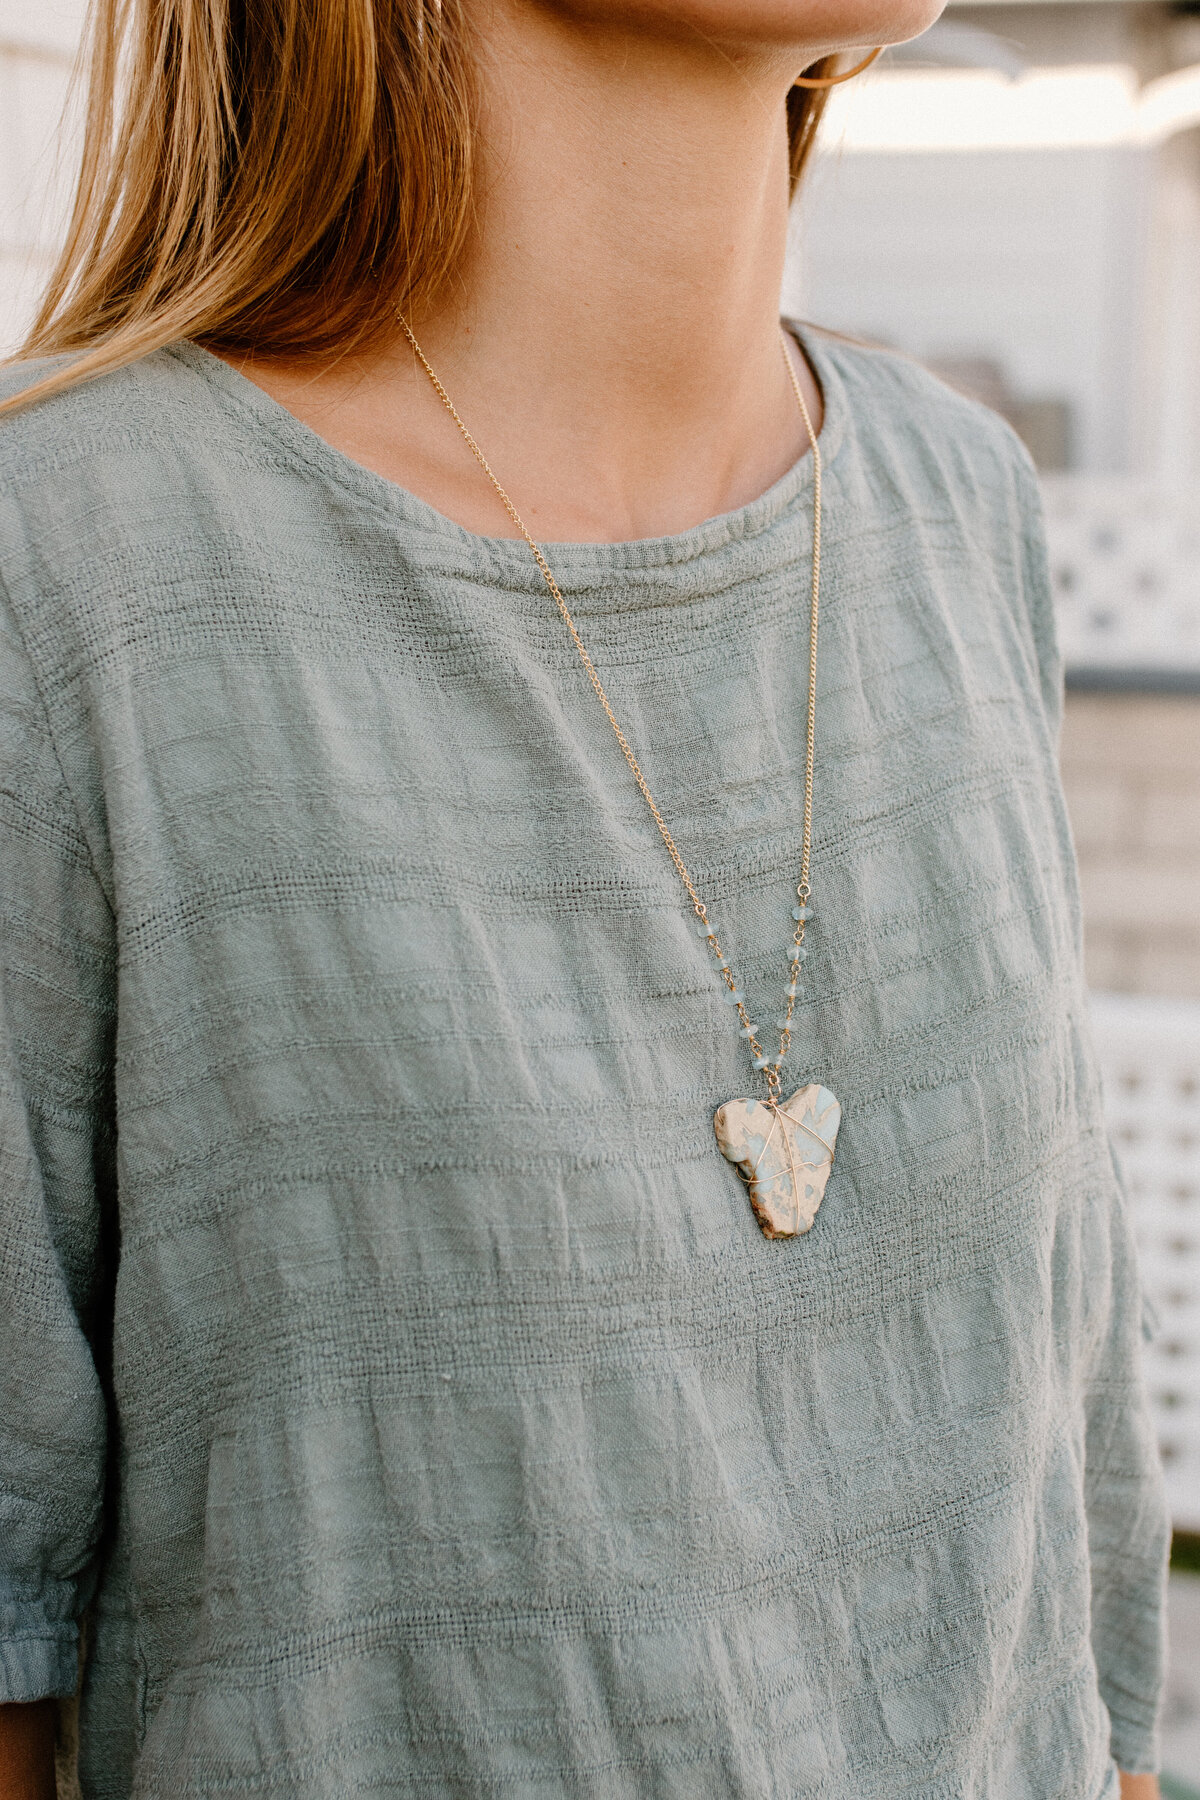 stone necklace on sage colored shirt